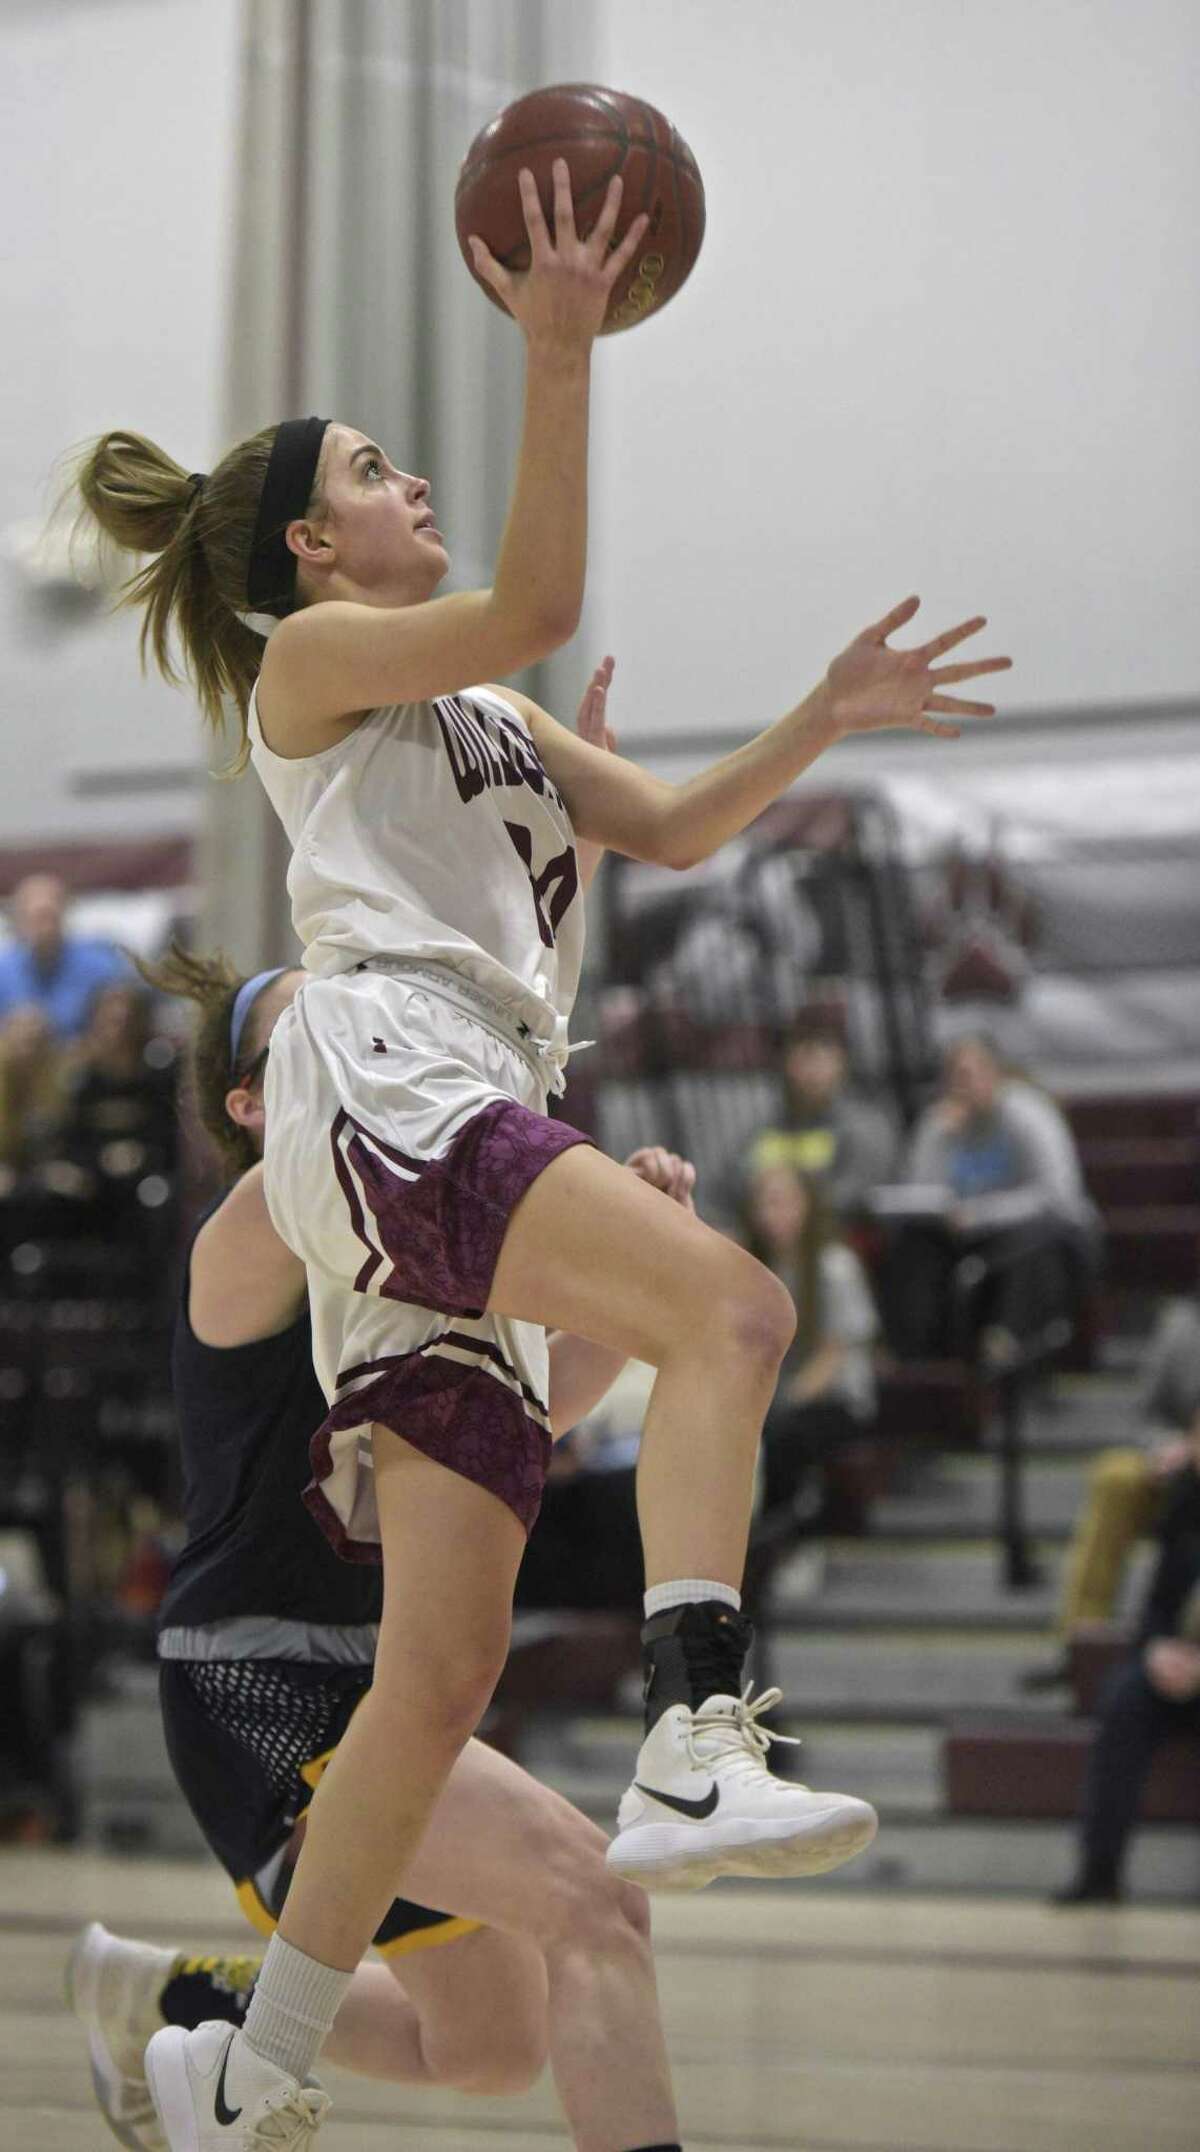 Bethel’s Britney Roach goes to the basket in the girls SWC basketball quarterfinal game against Weston on Friday night at Bethel High School. Bethel won 48-34.